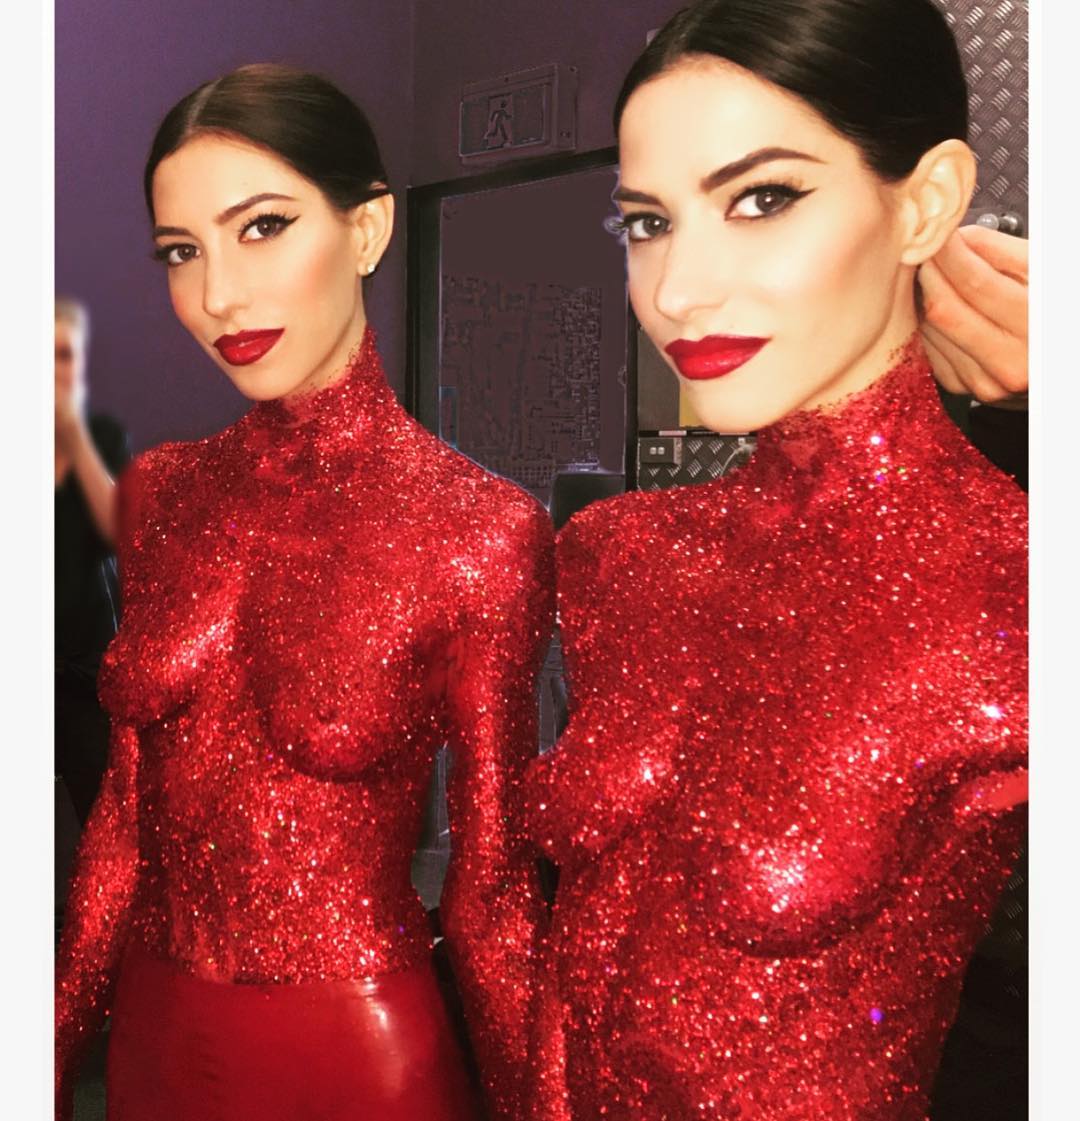 Topless Photos of The Veronicas #79599855